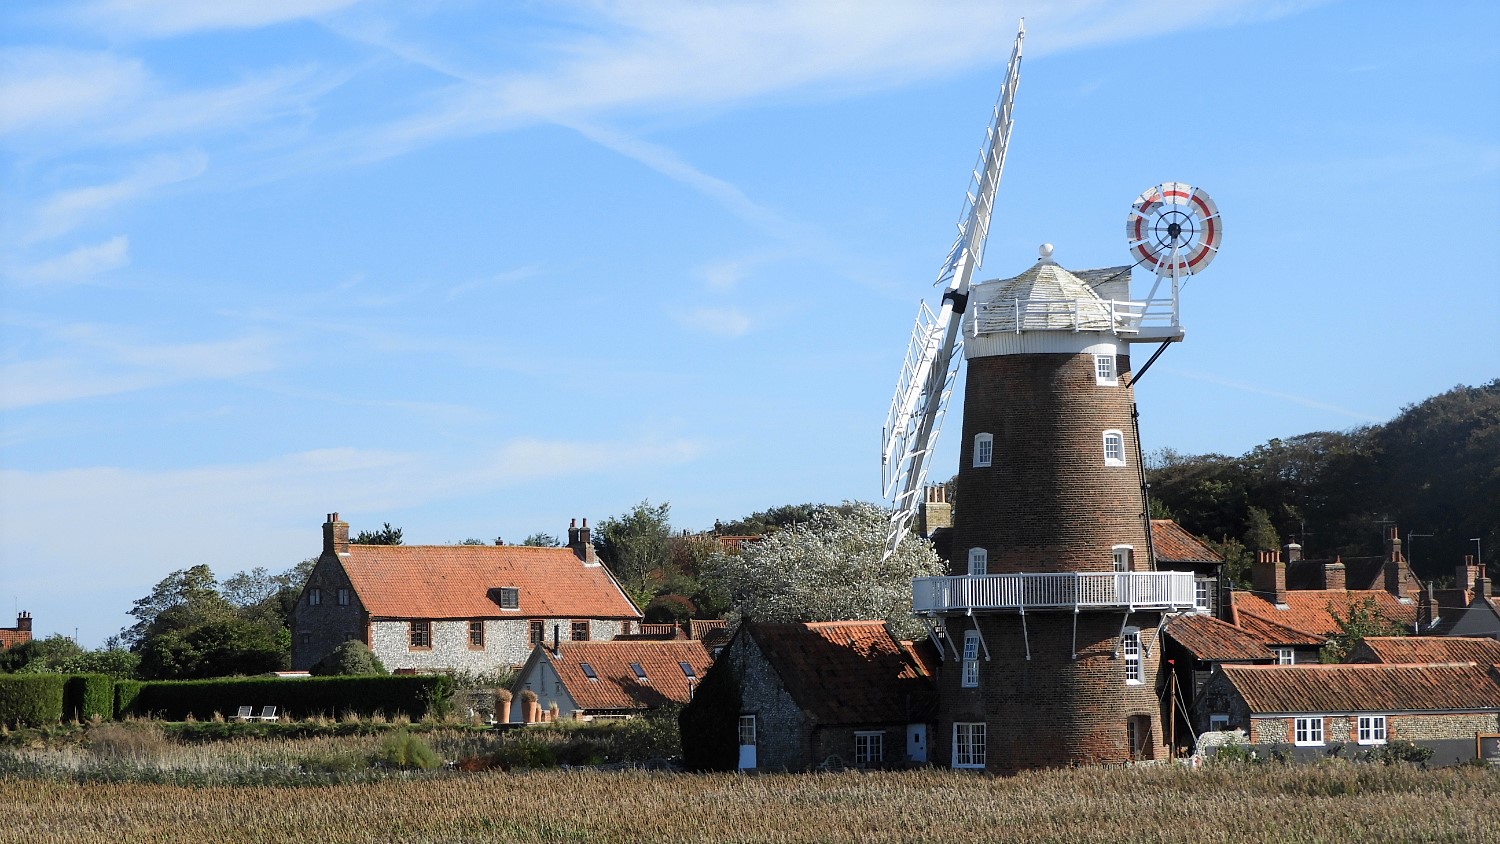 Traditional Windmill at Cley next the Sea